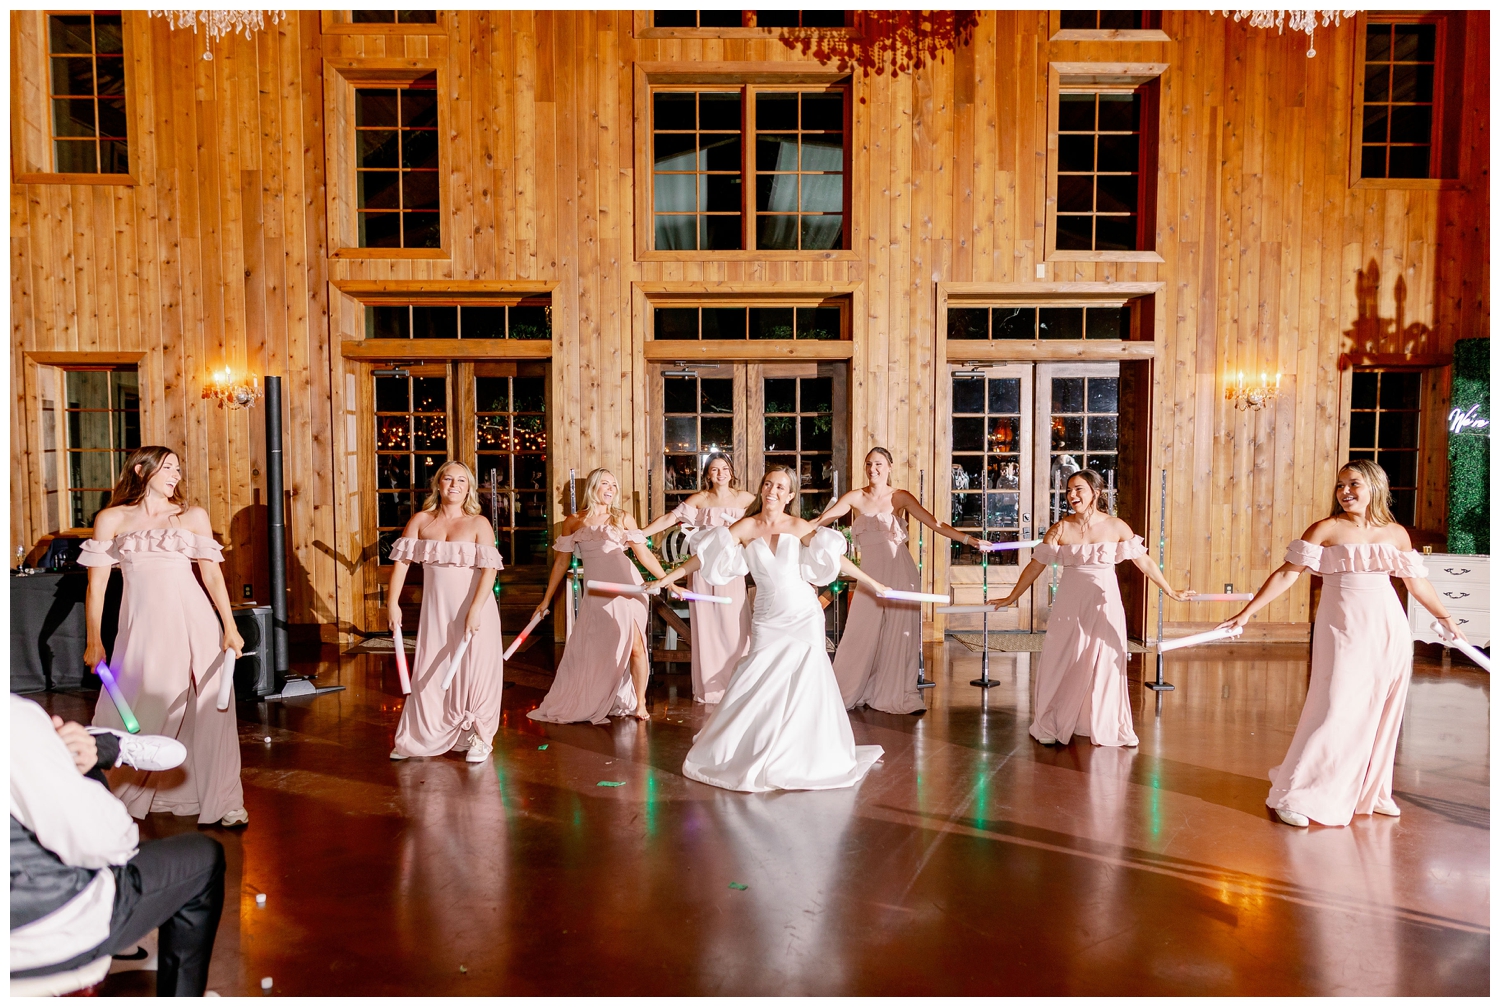 bride and bridesmaids in blush dresses dancing as a group at reception